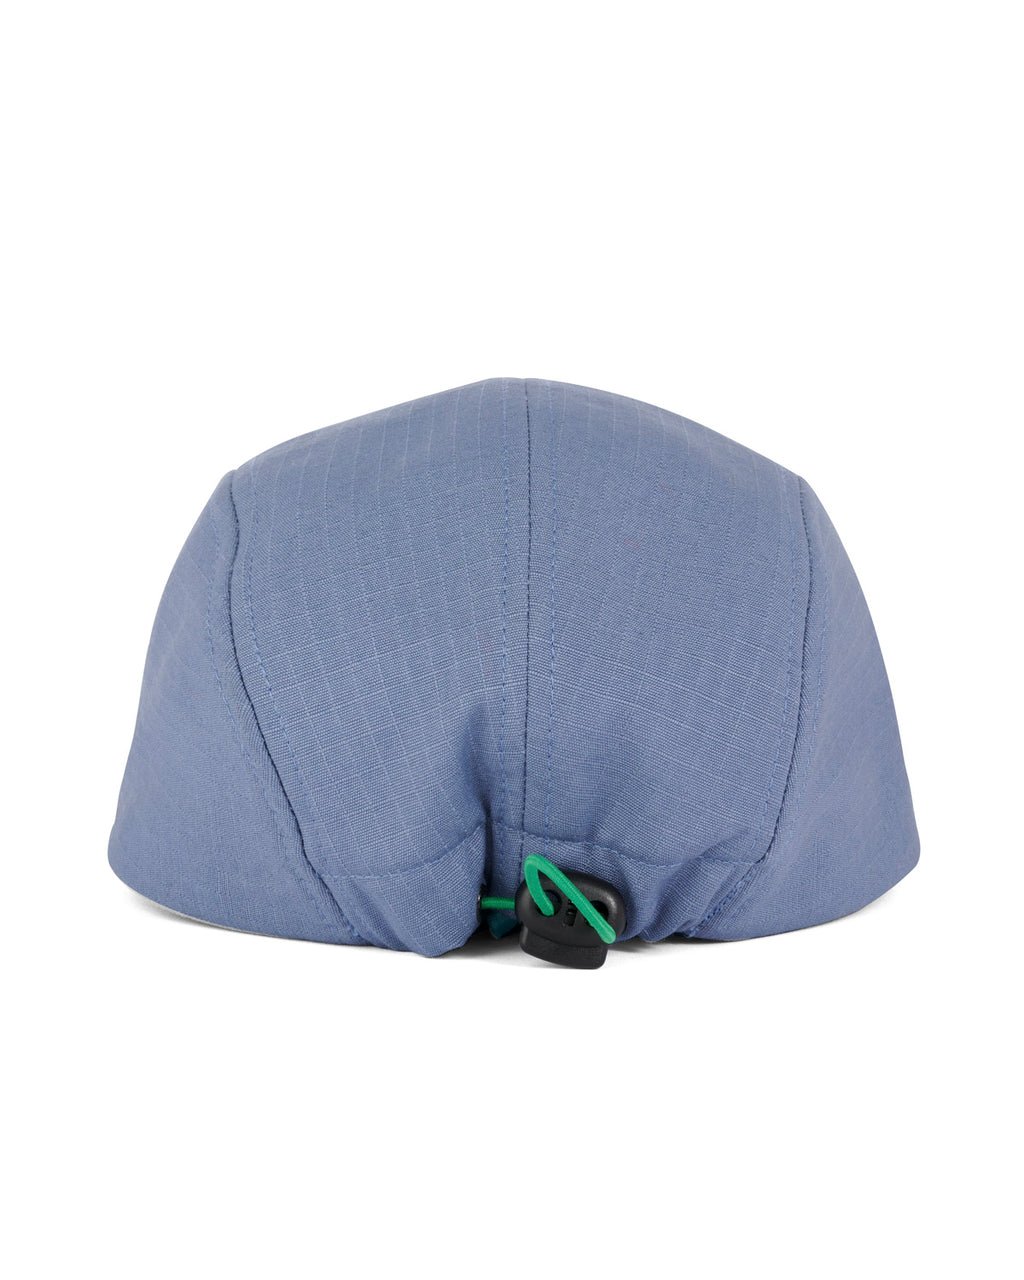 Anglers 5 Panel Camp Hat - Navy 2